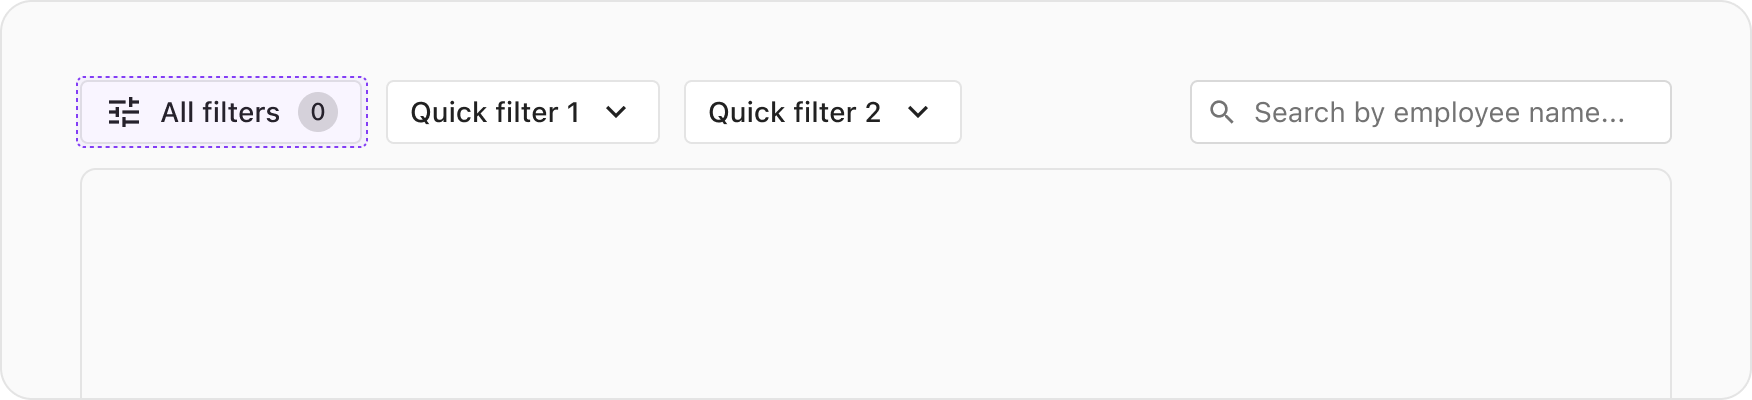 A UI example highlighting the all filters button